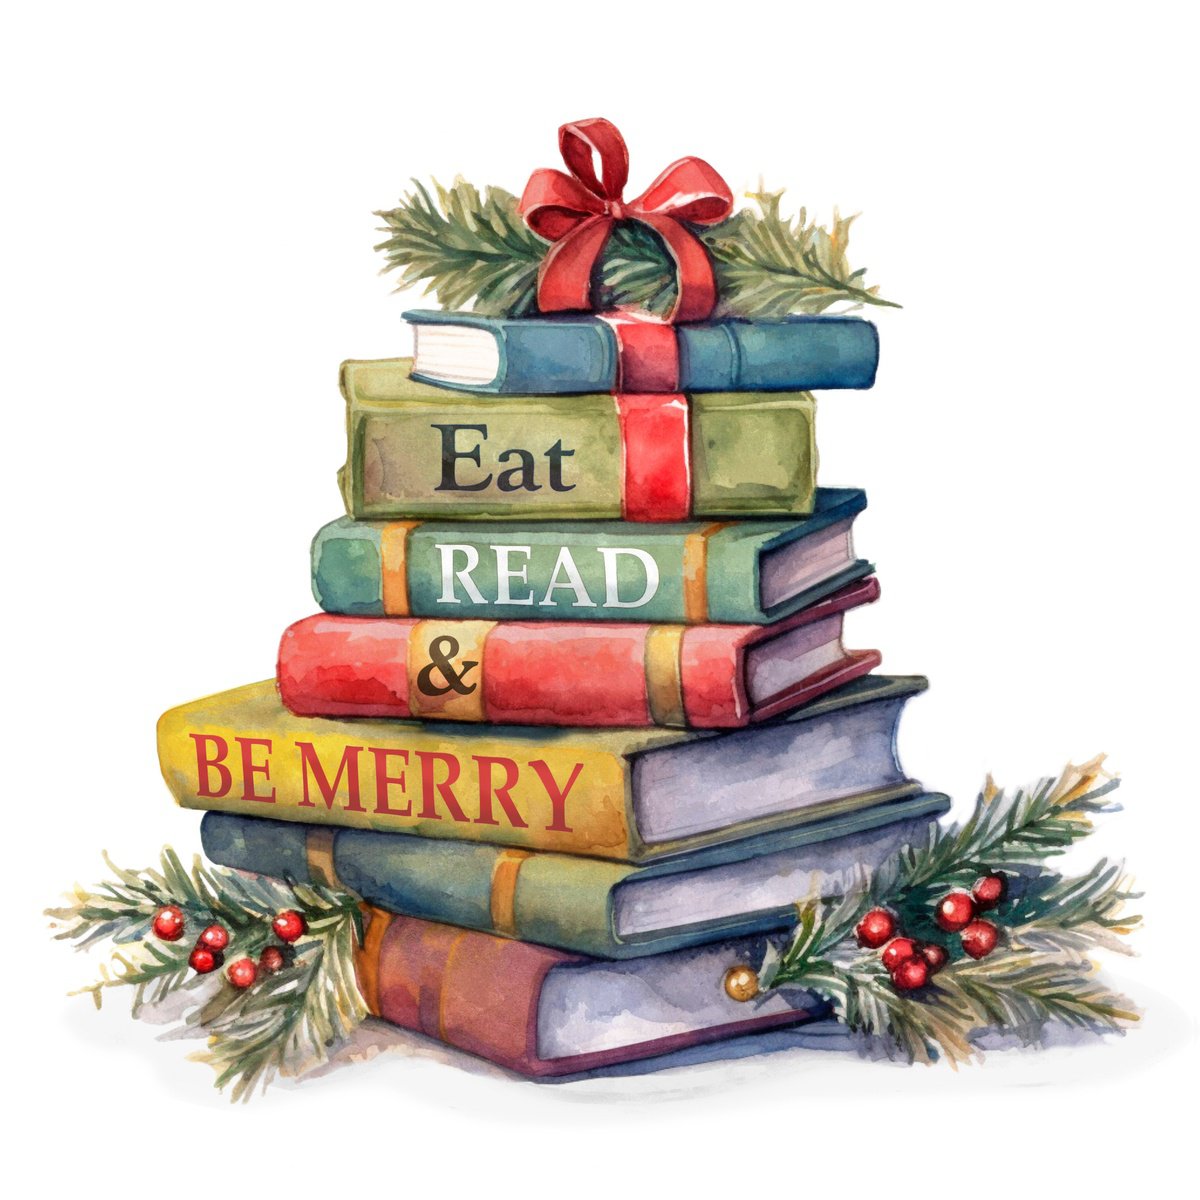 Eat, Read & Be Merry by Peter Walters